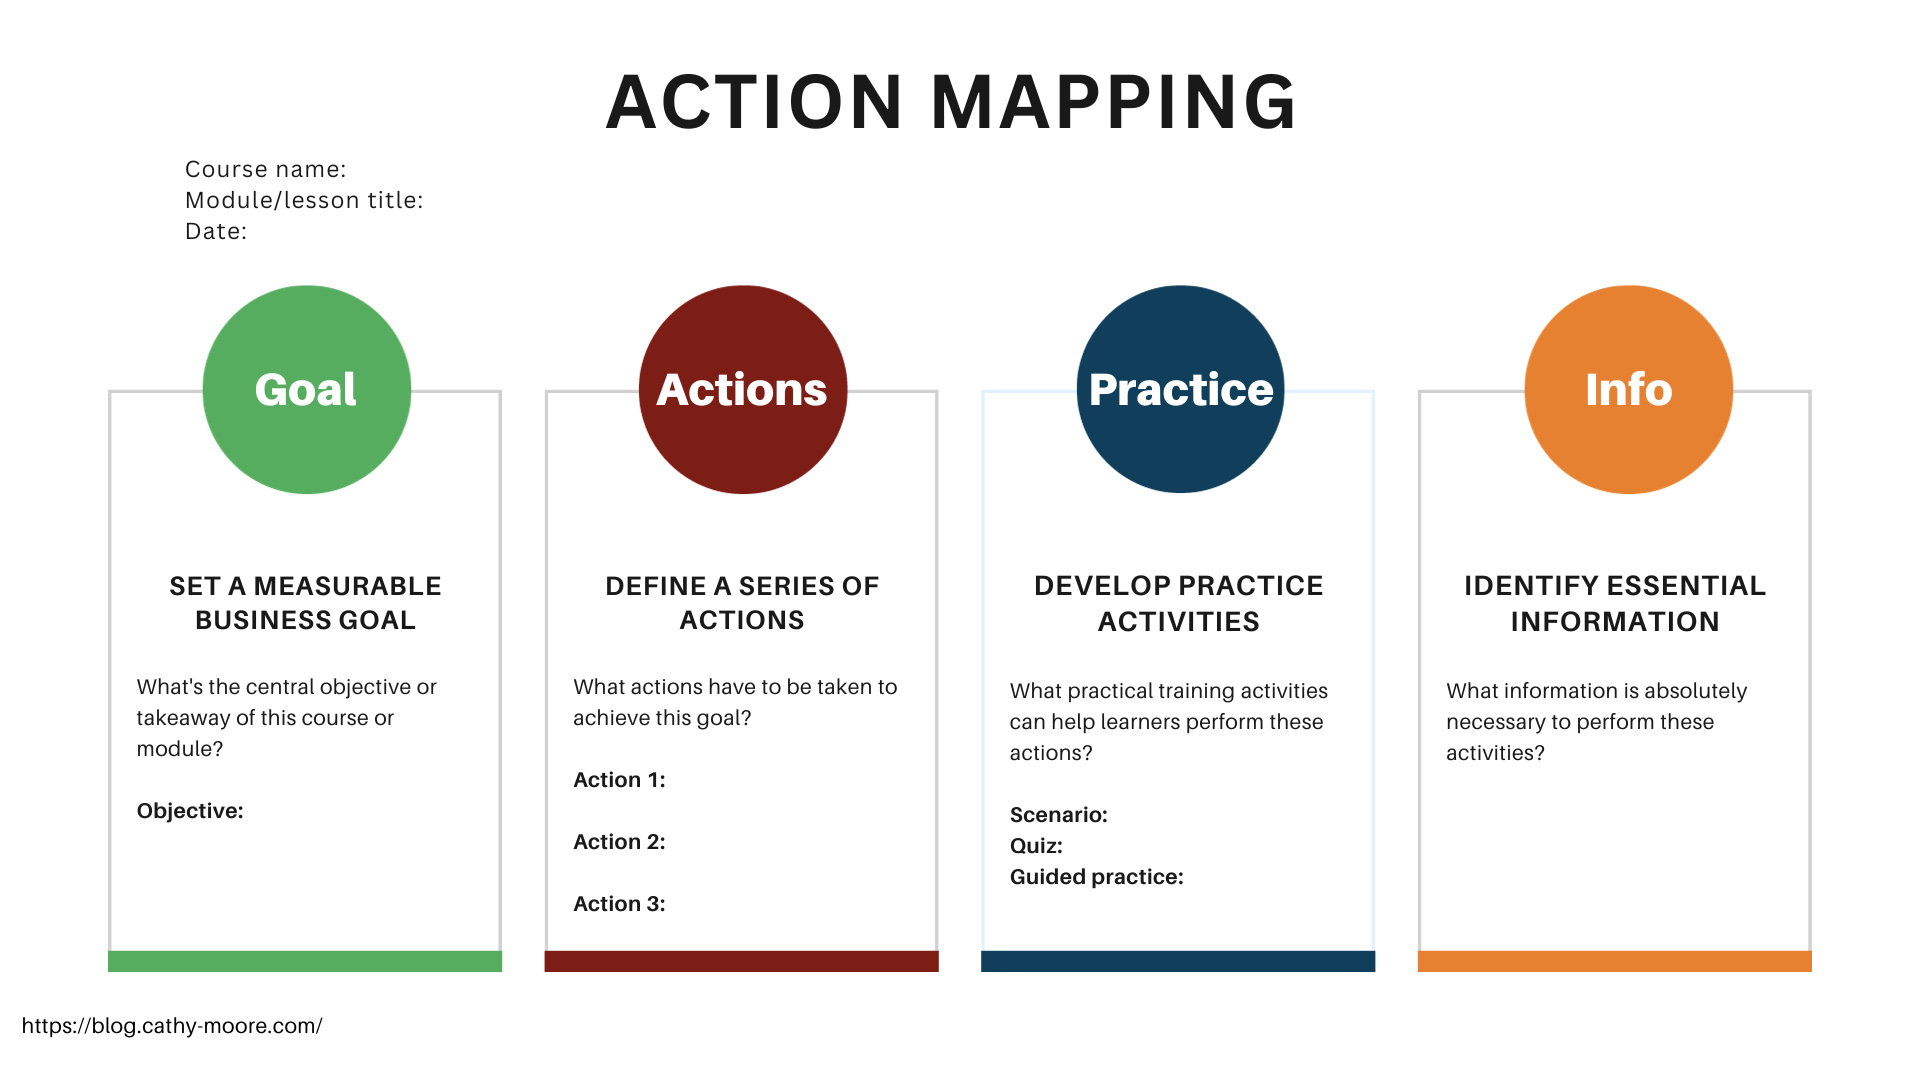 The four elements of an Action Mapping storyboard.